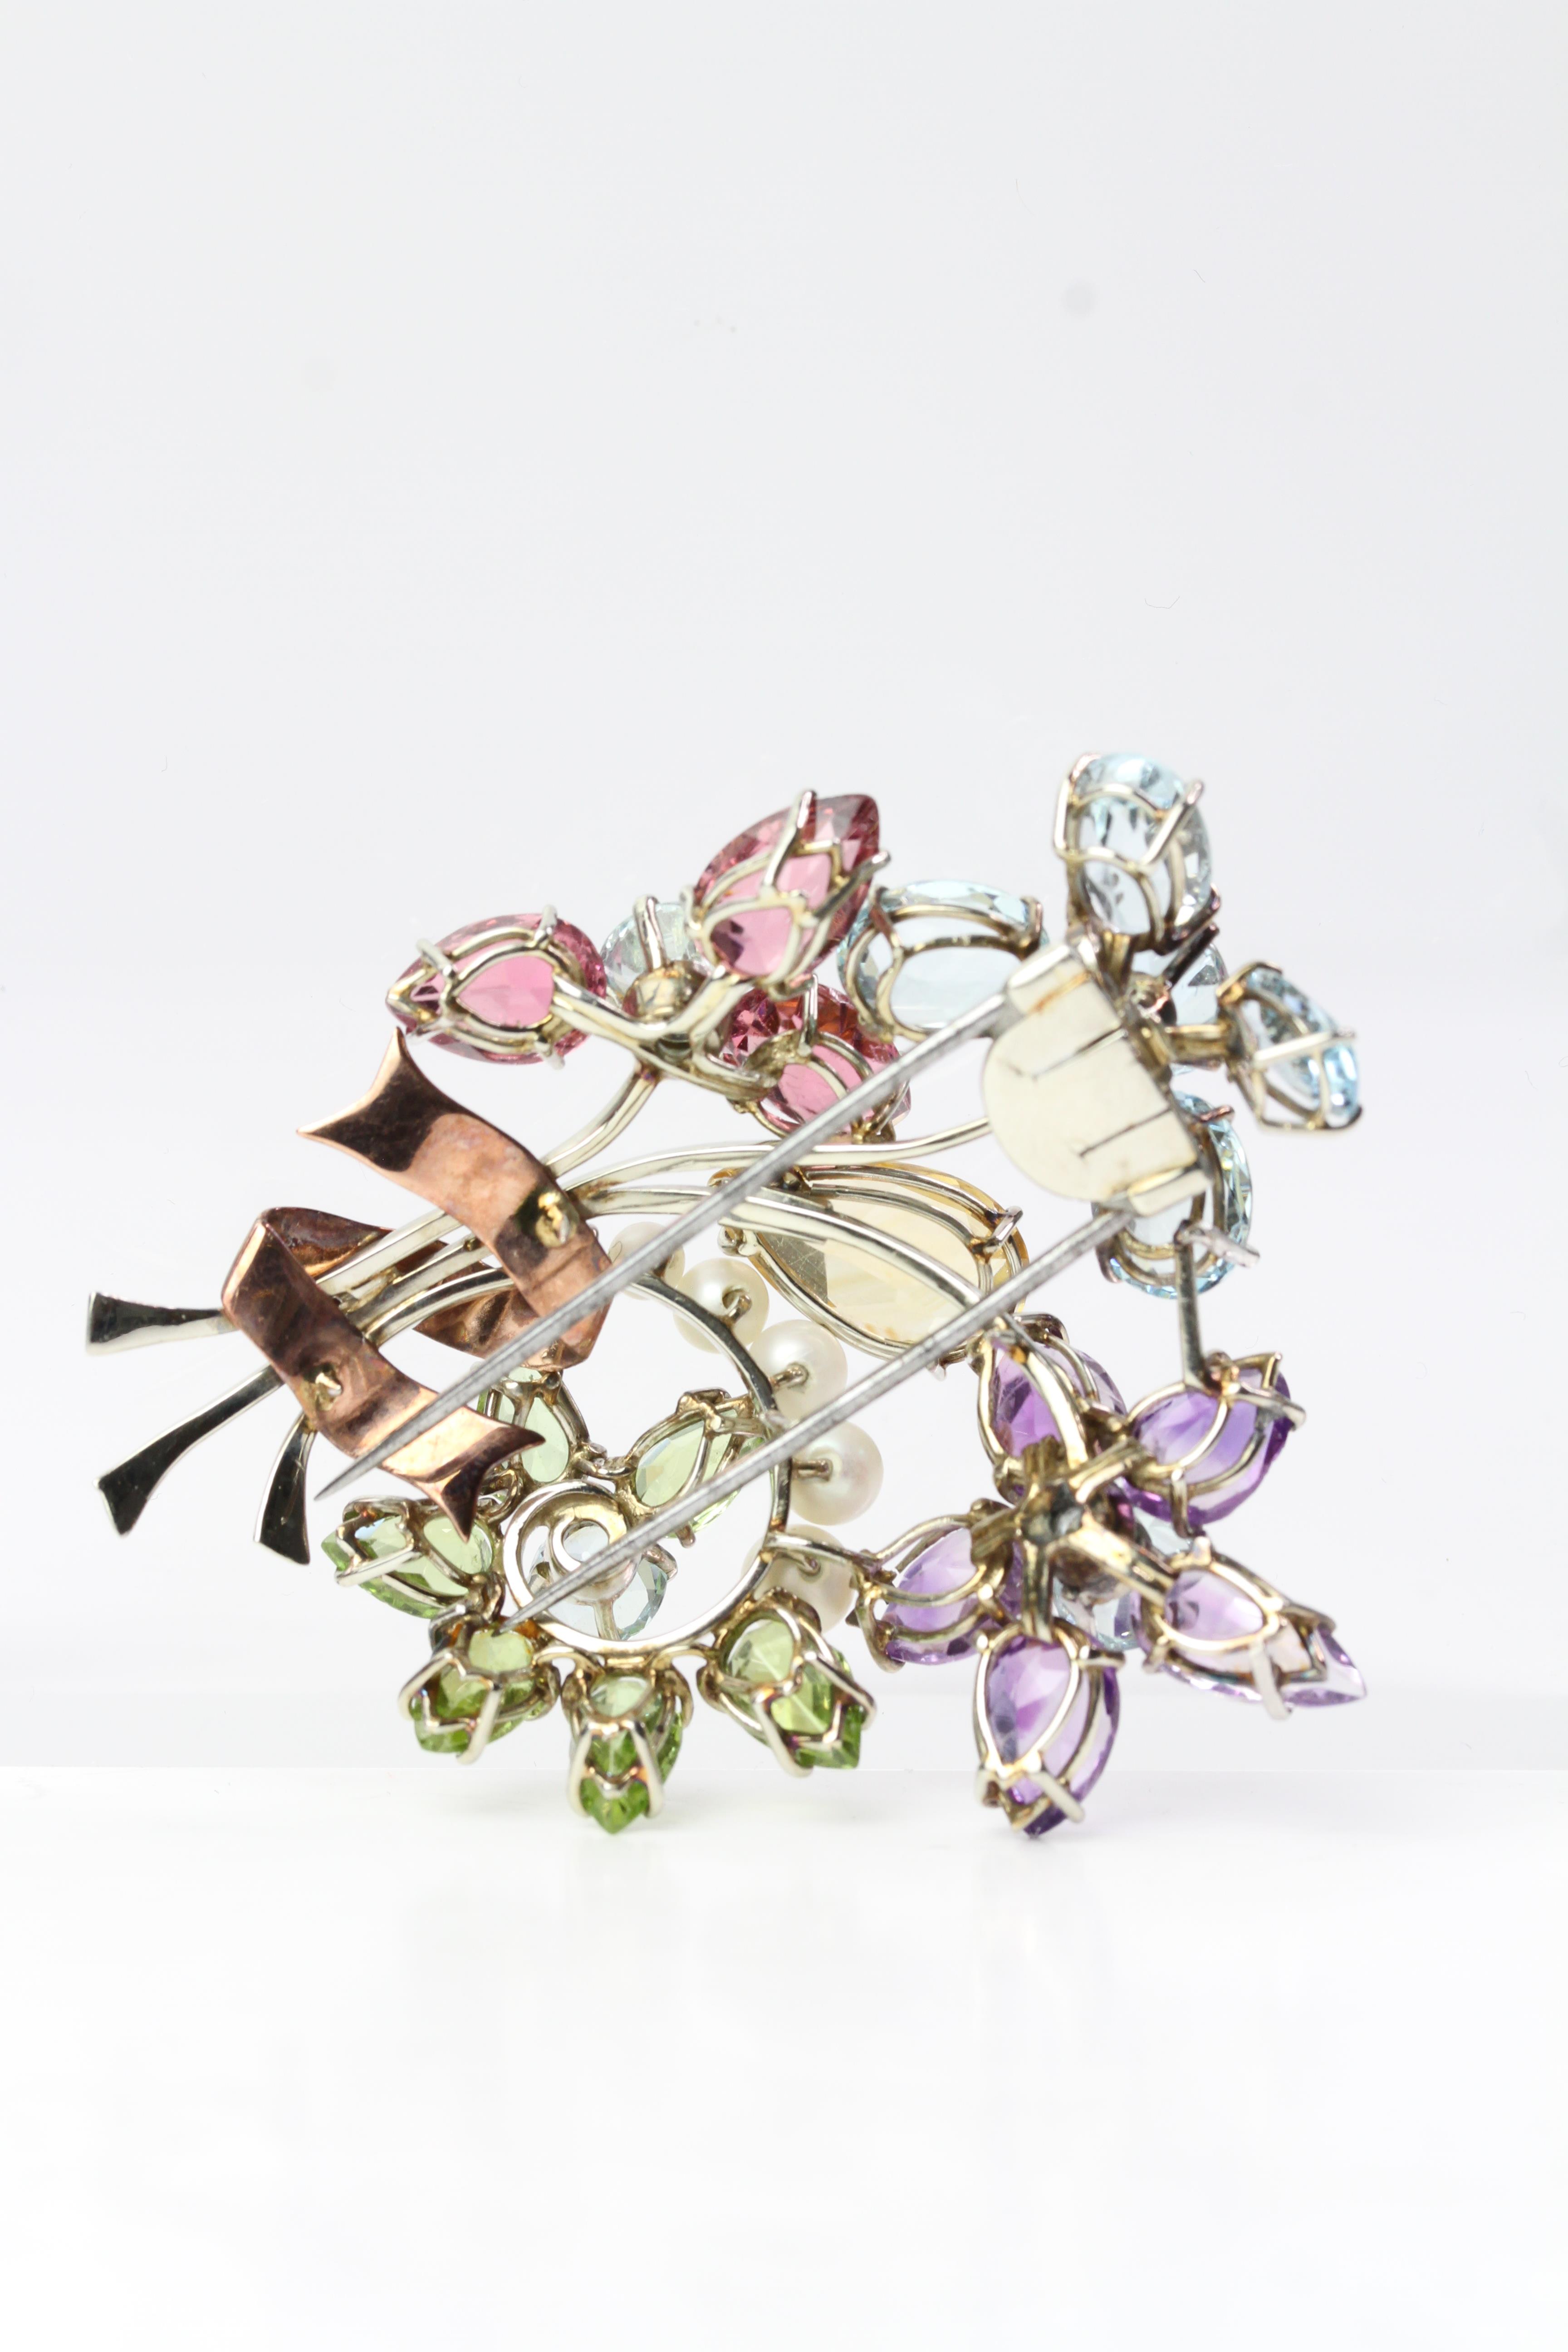 C1950 floral brooch with multi gemstones and pearls - Image 3 of 3